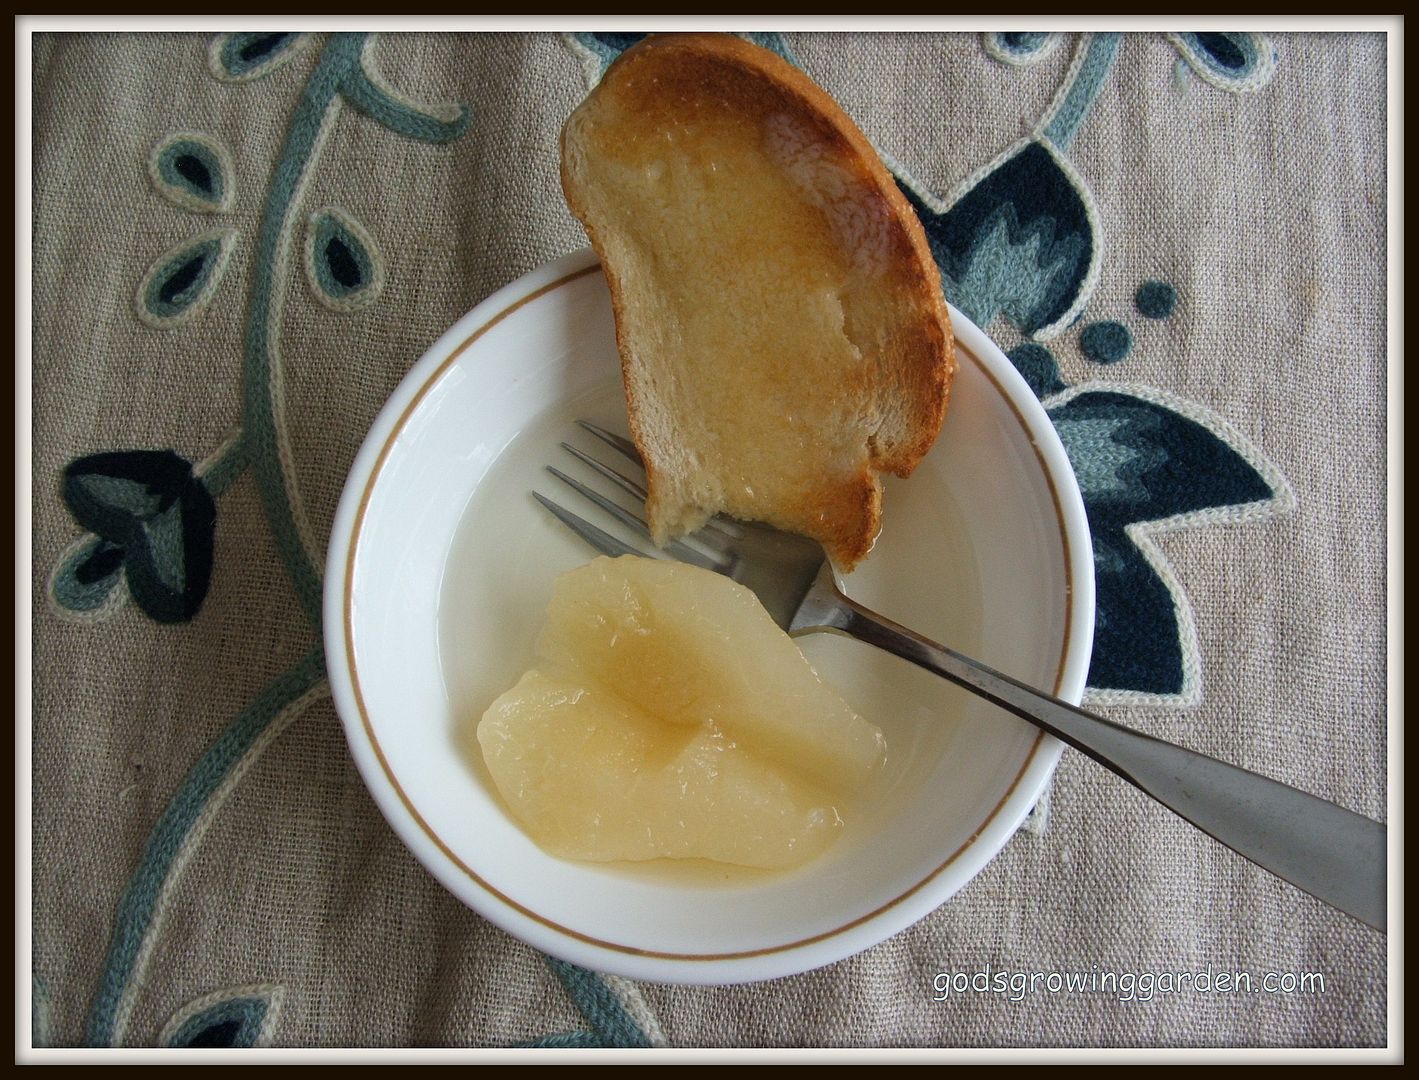 Canned Pears & Toast by Angie Ouellette-Tower for godsgrowinggarden.com photo 008_zps1da8329a.jpg